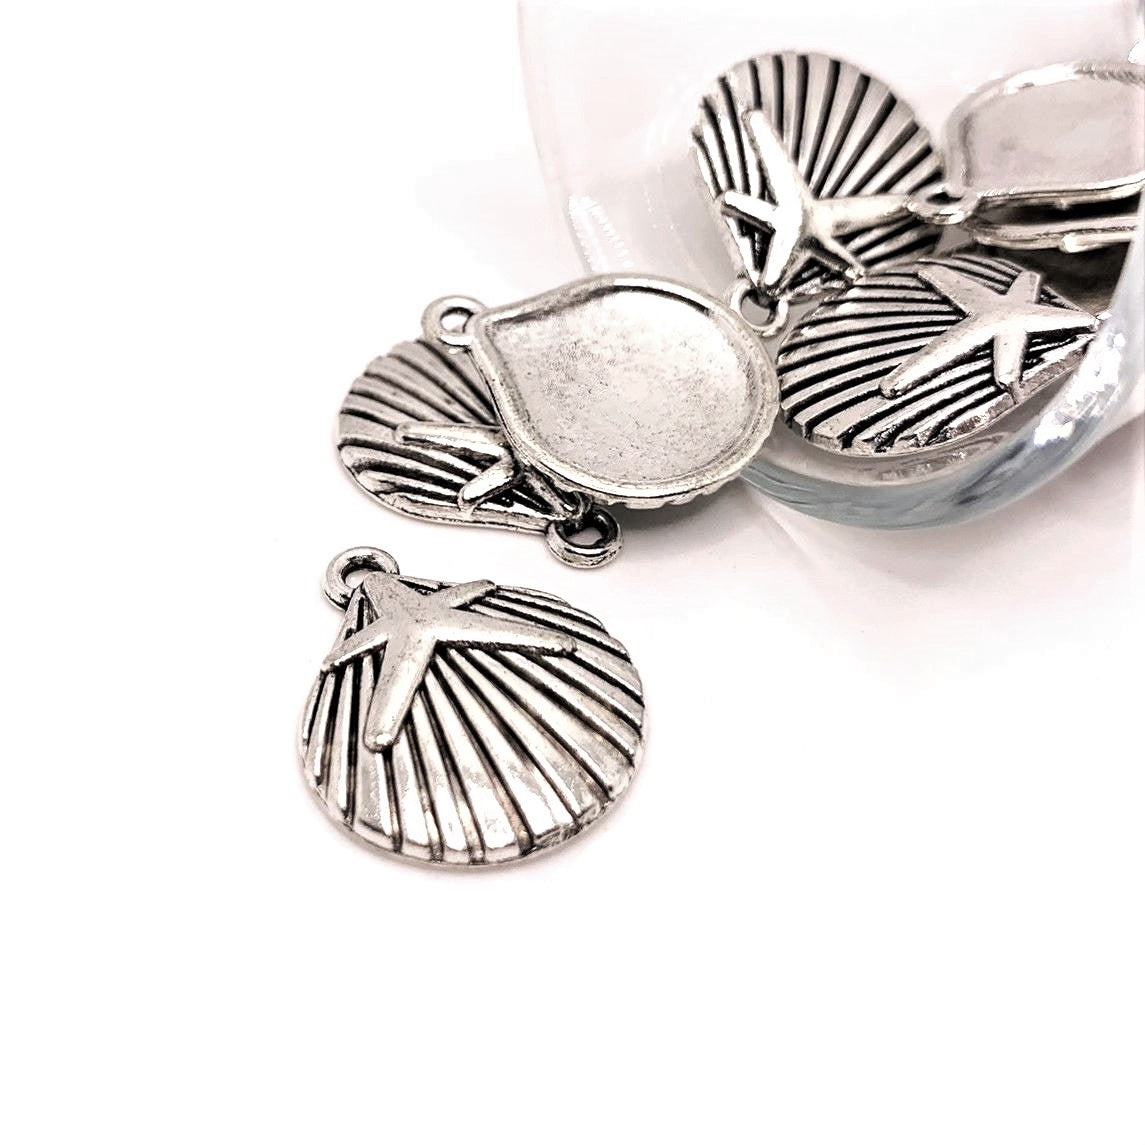 4, 20 or 50 Pieces: Silver Shell and Starfish Charms